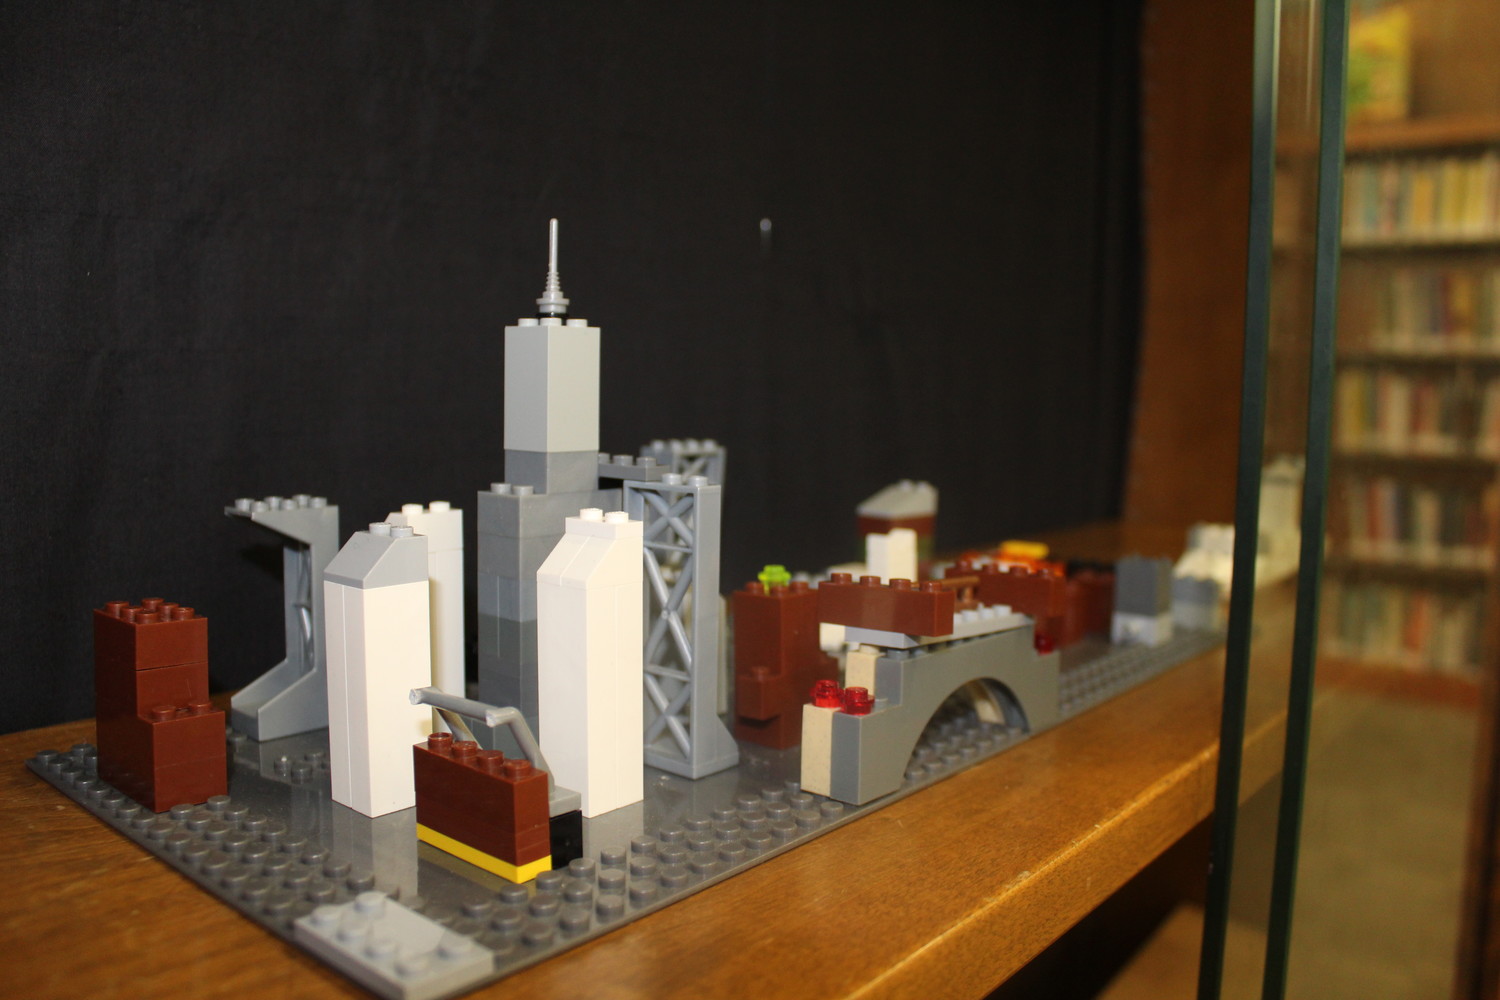 16-year-old Bryon Phillip made a city landscape for his project.